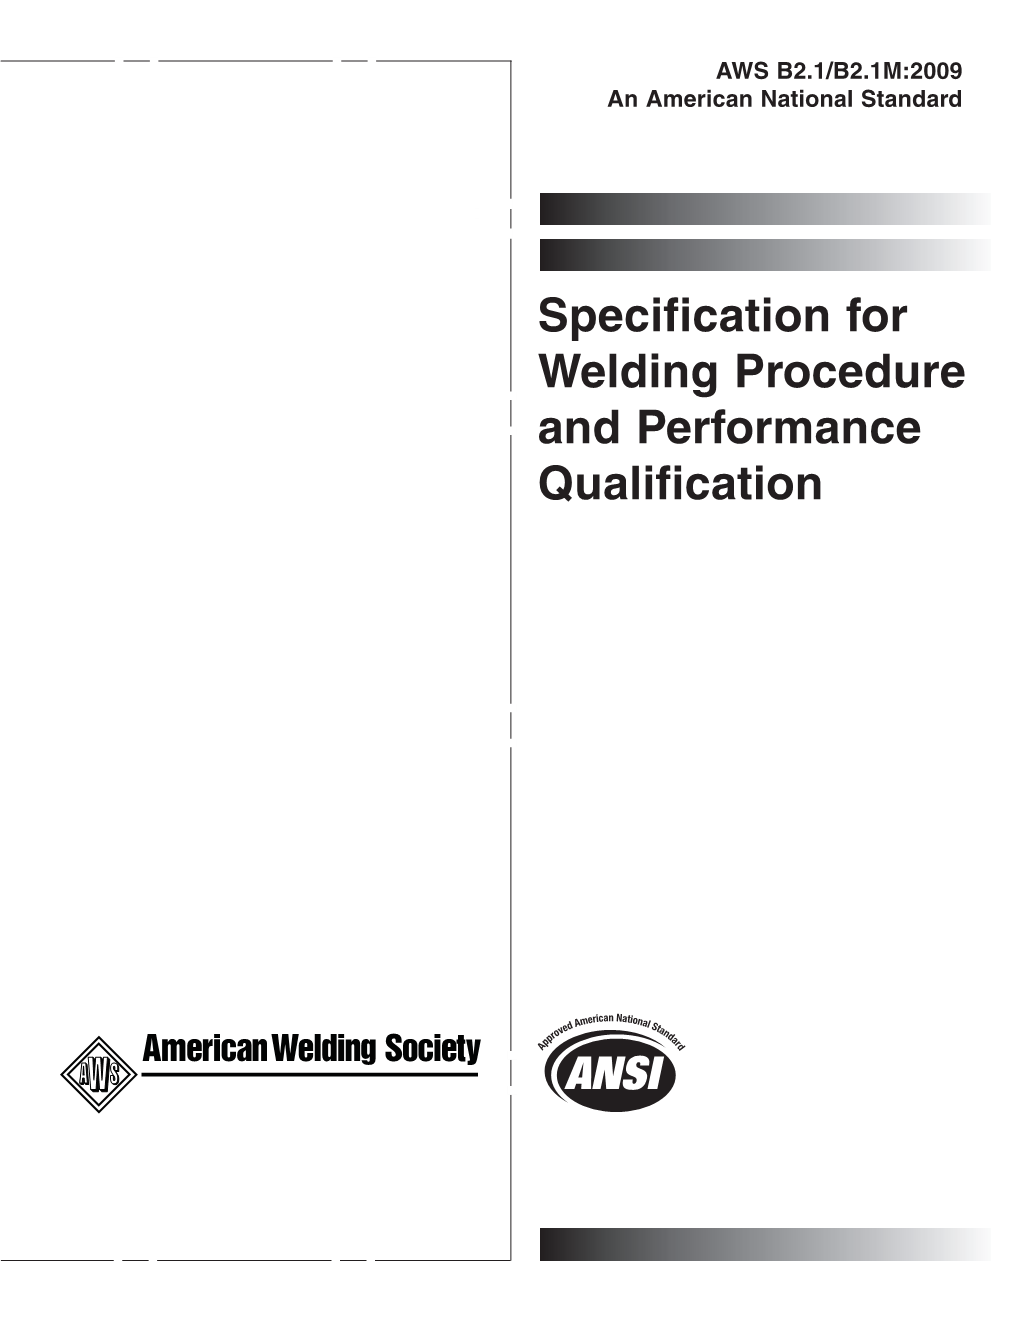 Specification for Welding Procedure and Performance Qualification AWS B2.1/B2.1M:2009 an American National Standard